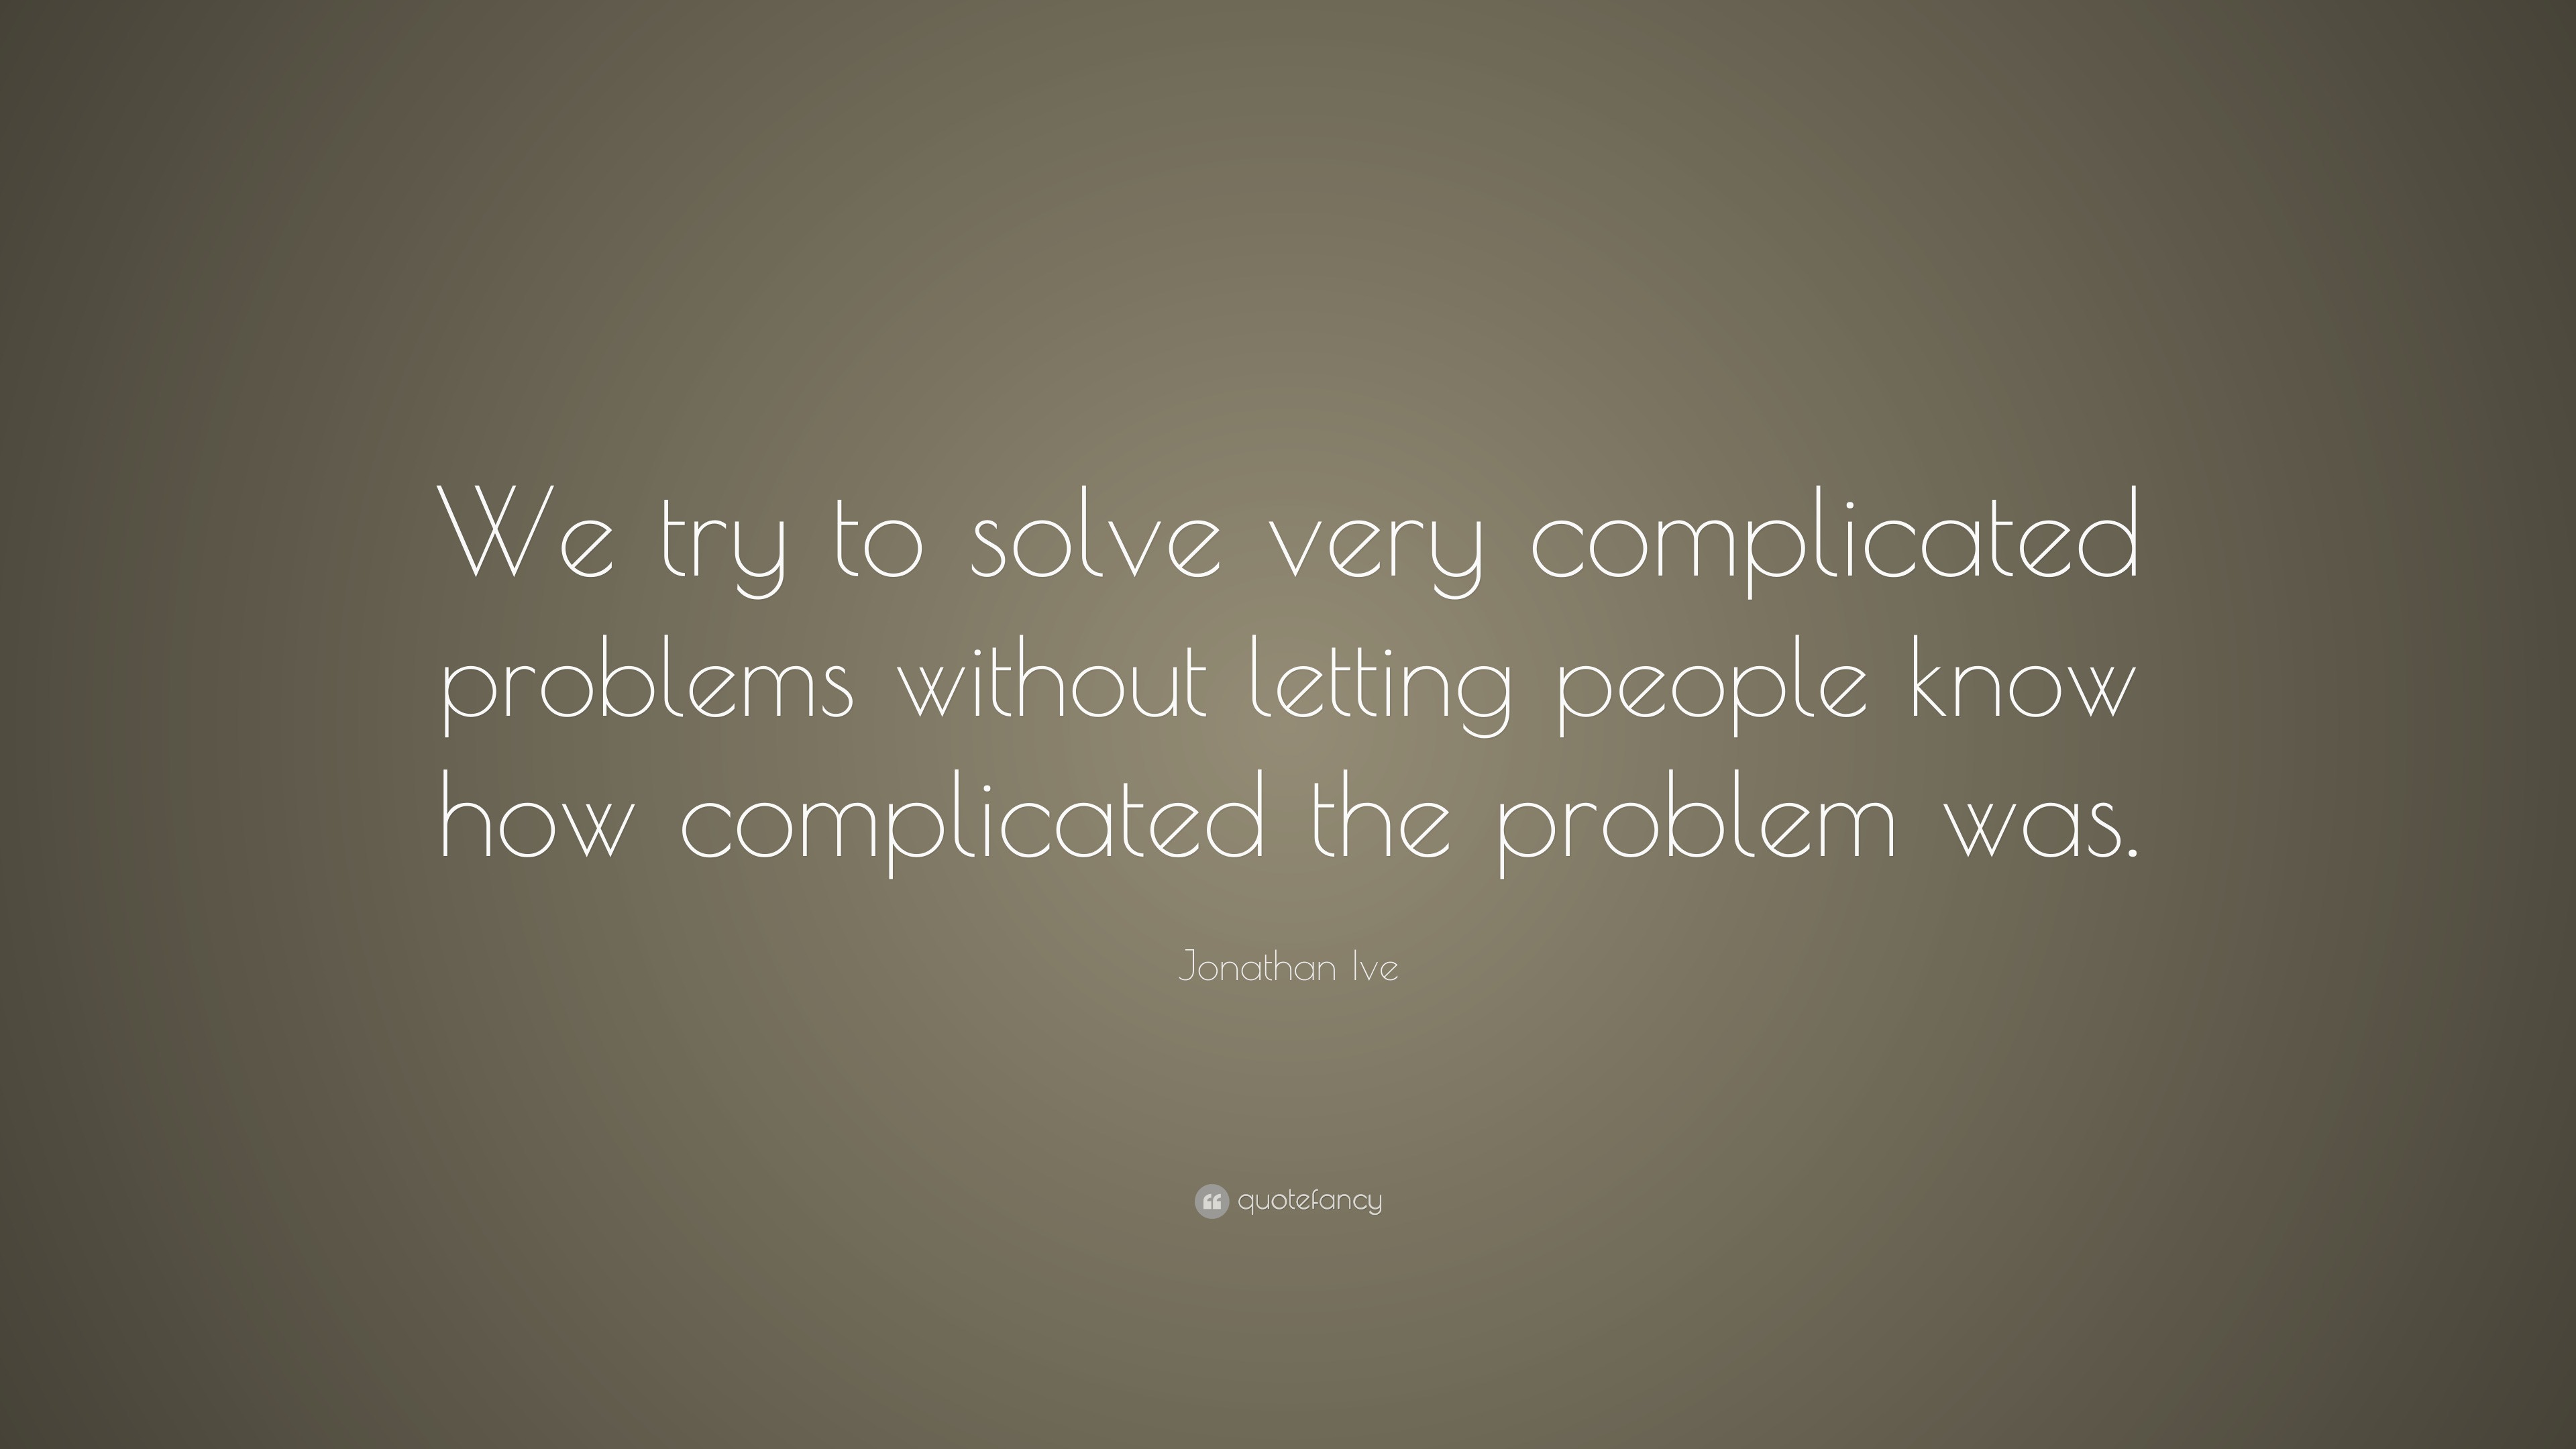 Jonathan Ive Quote: “We try to solve very complicated problems without ...